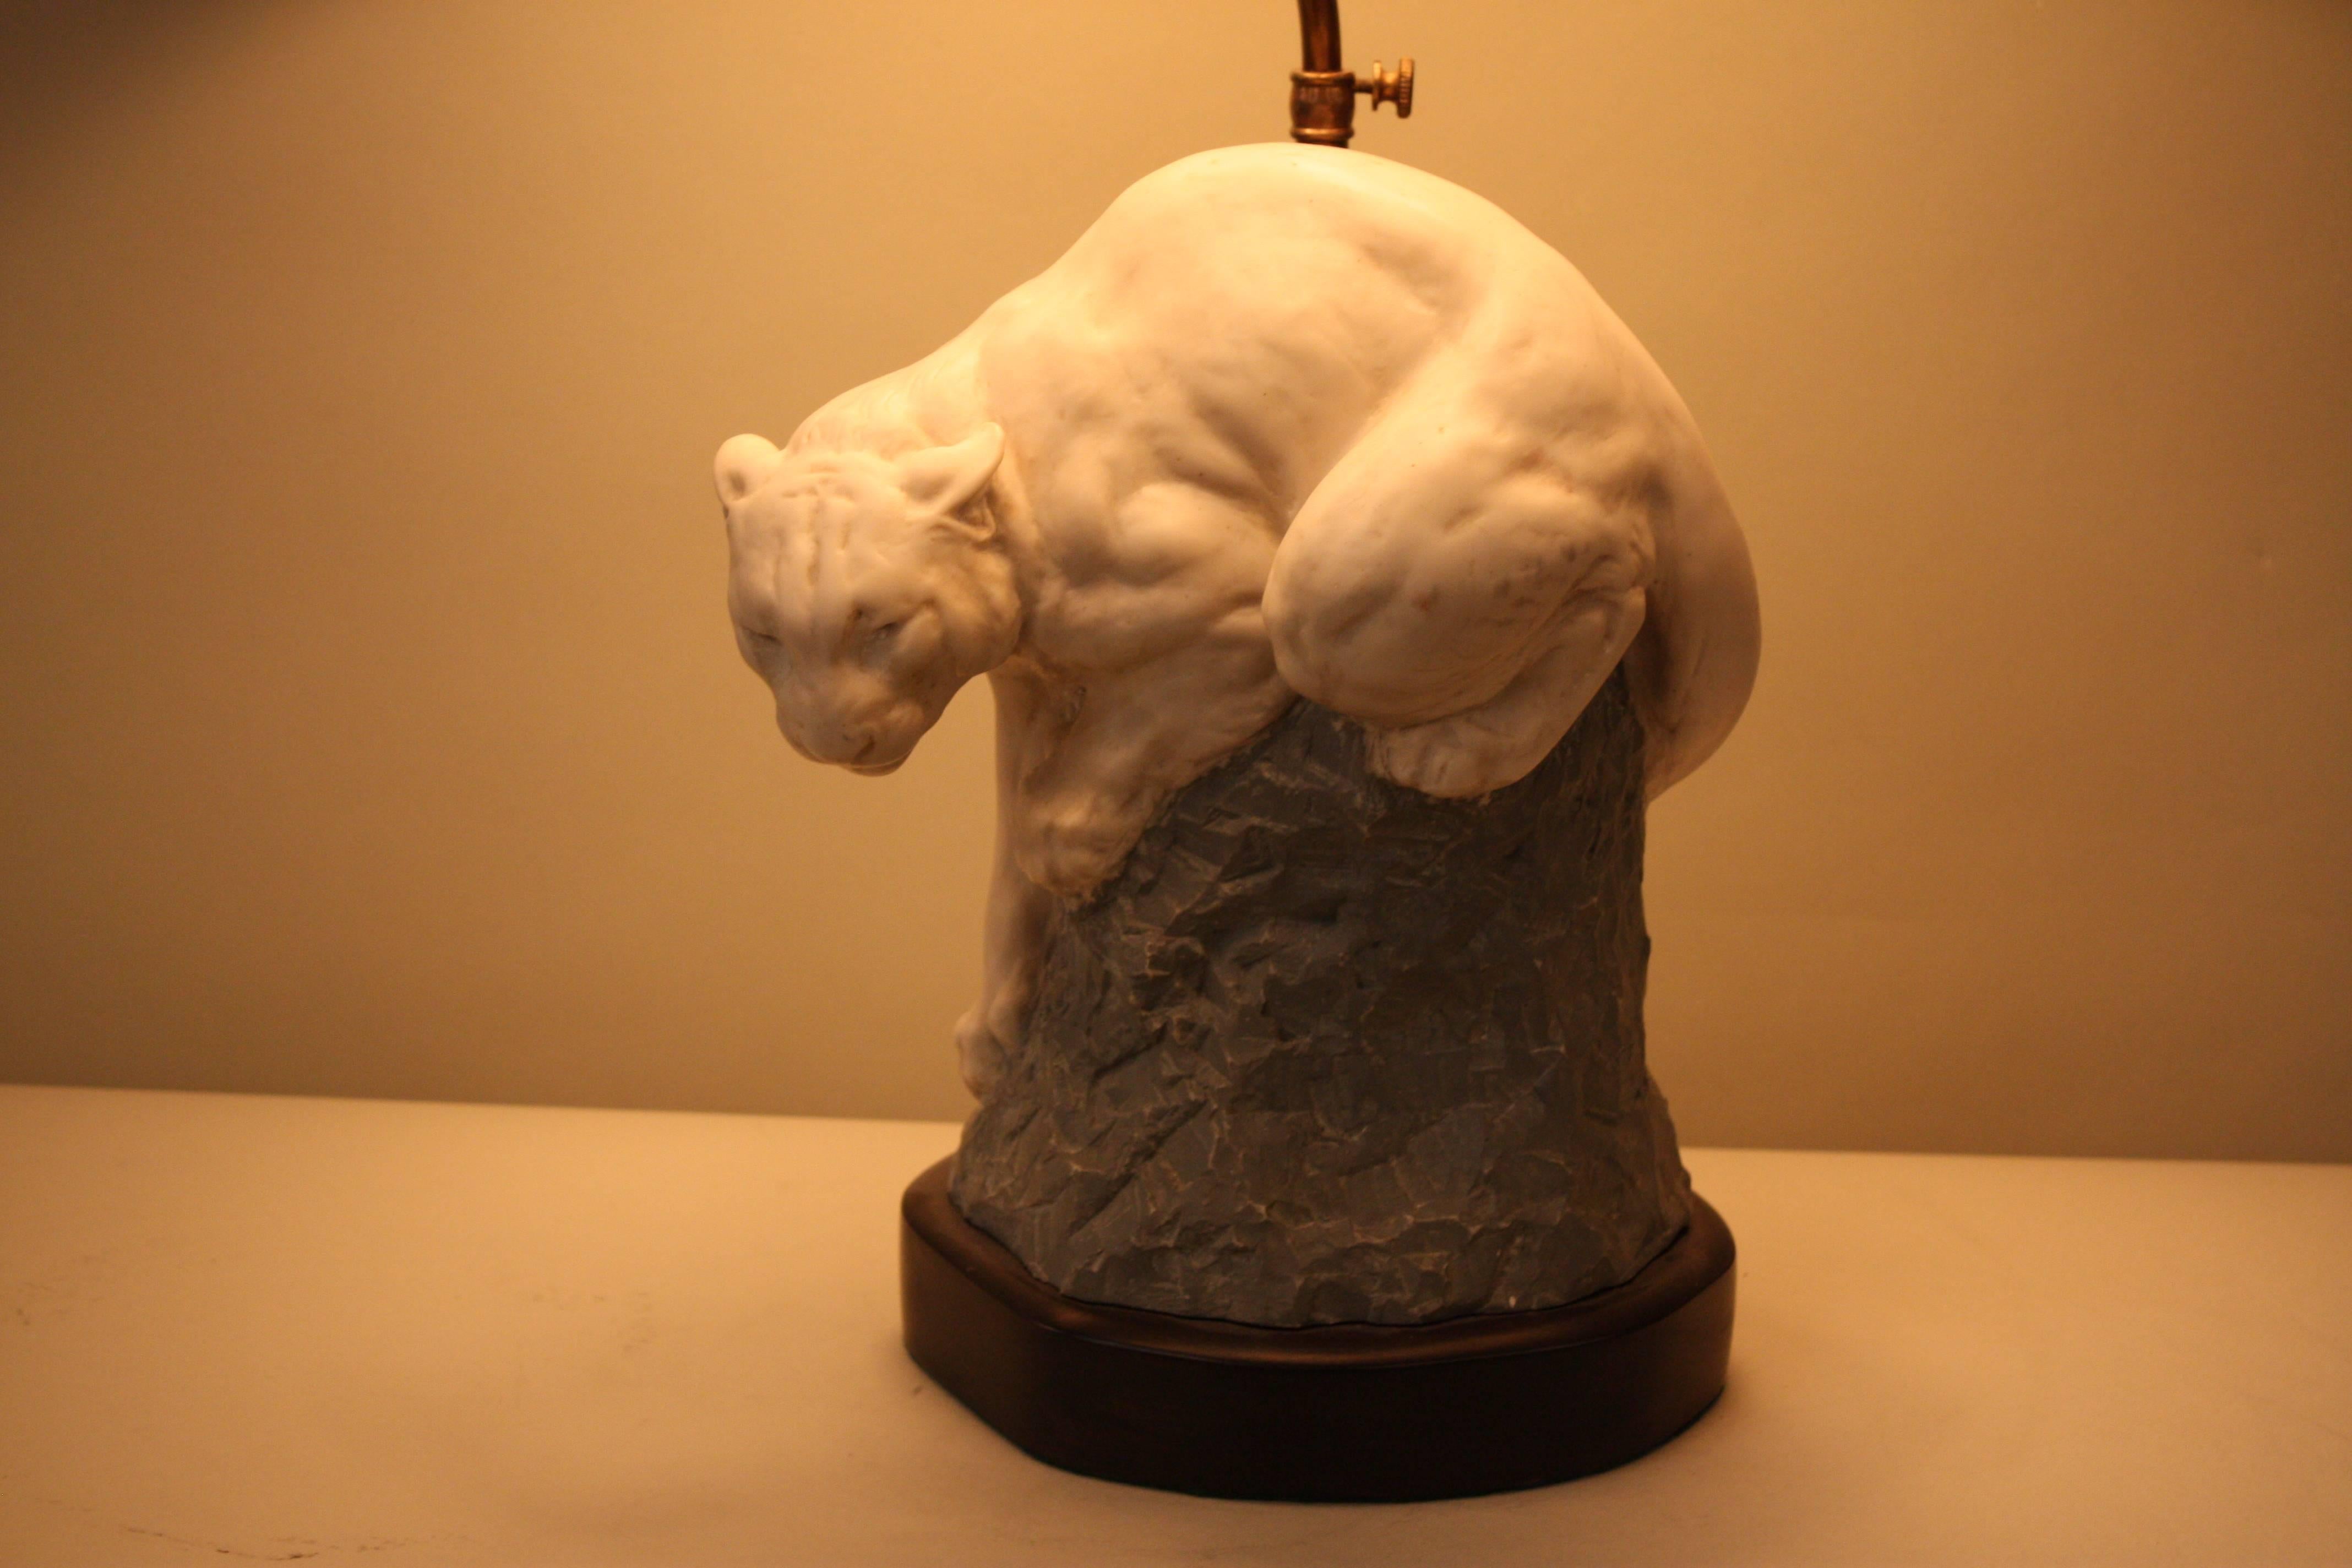 Customized table lamp of cougar- mountain lion sculpture.
Fitted with black oval shade.